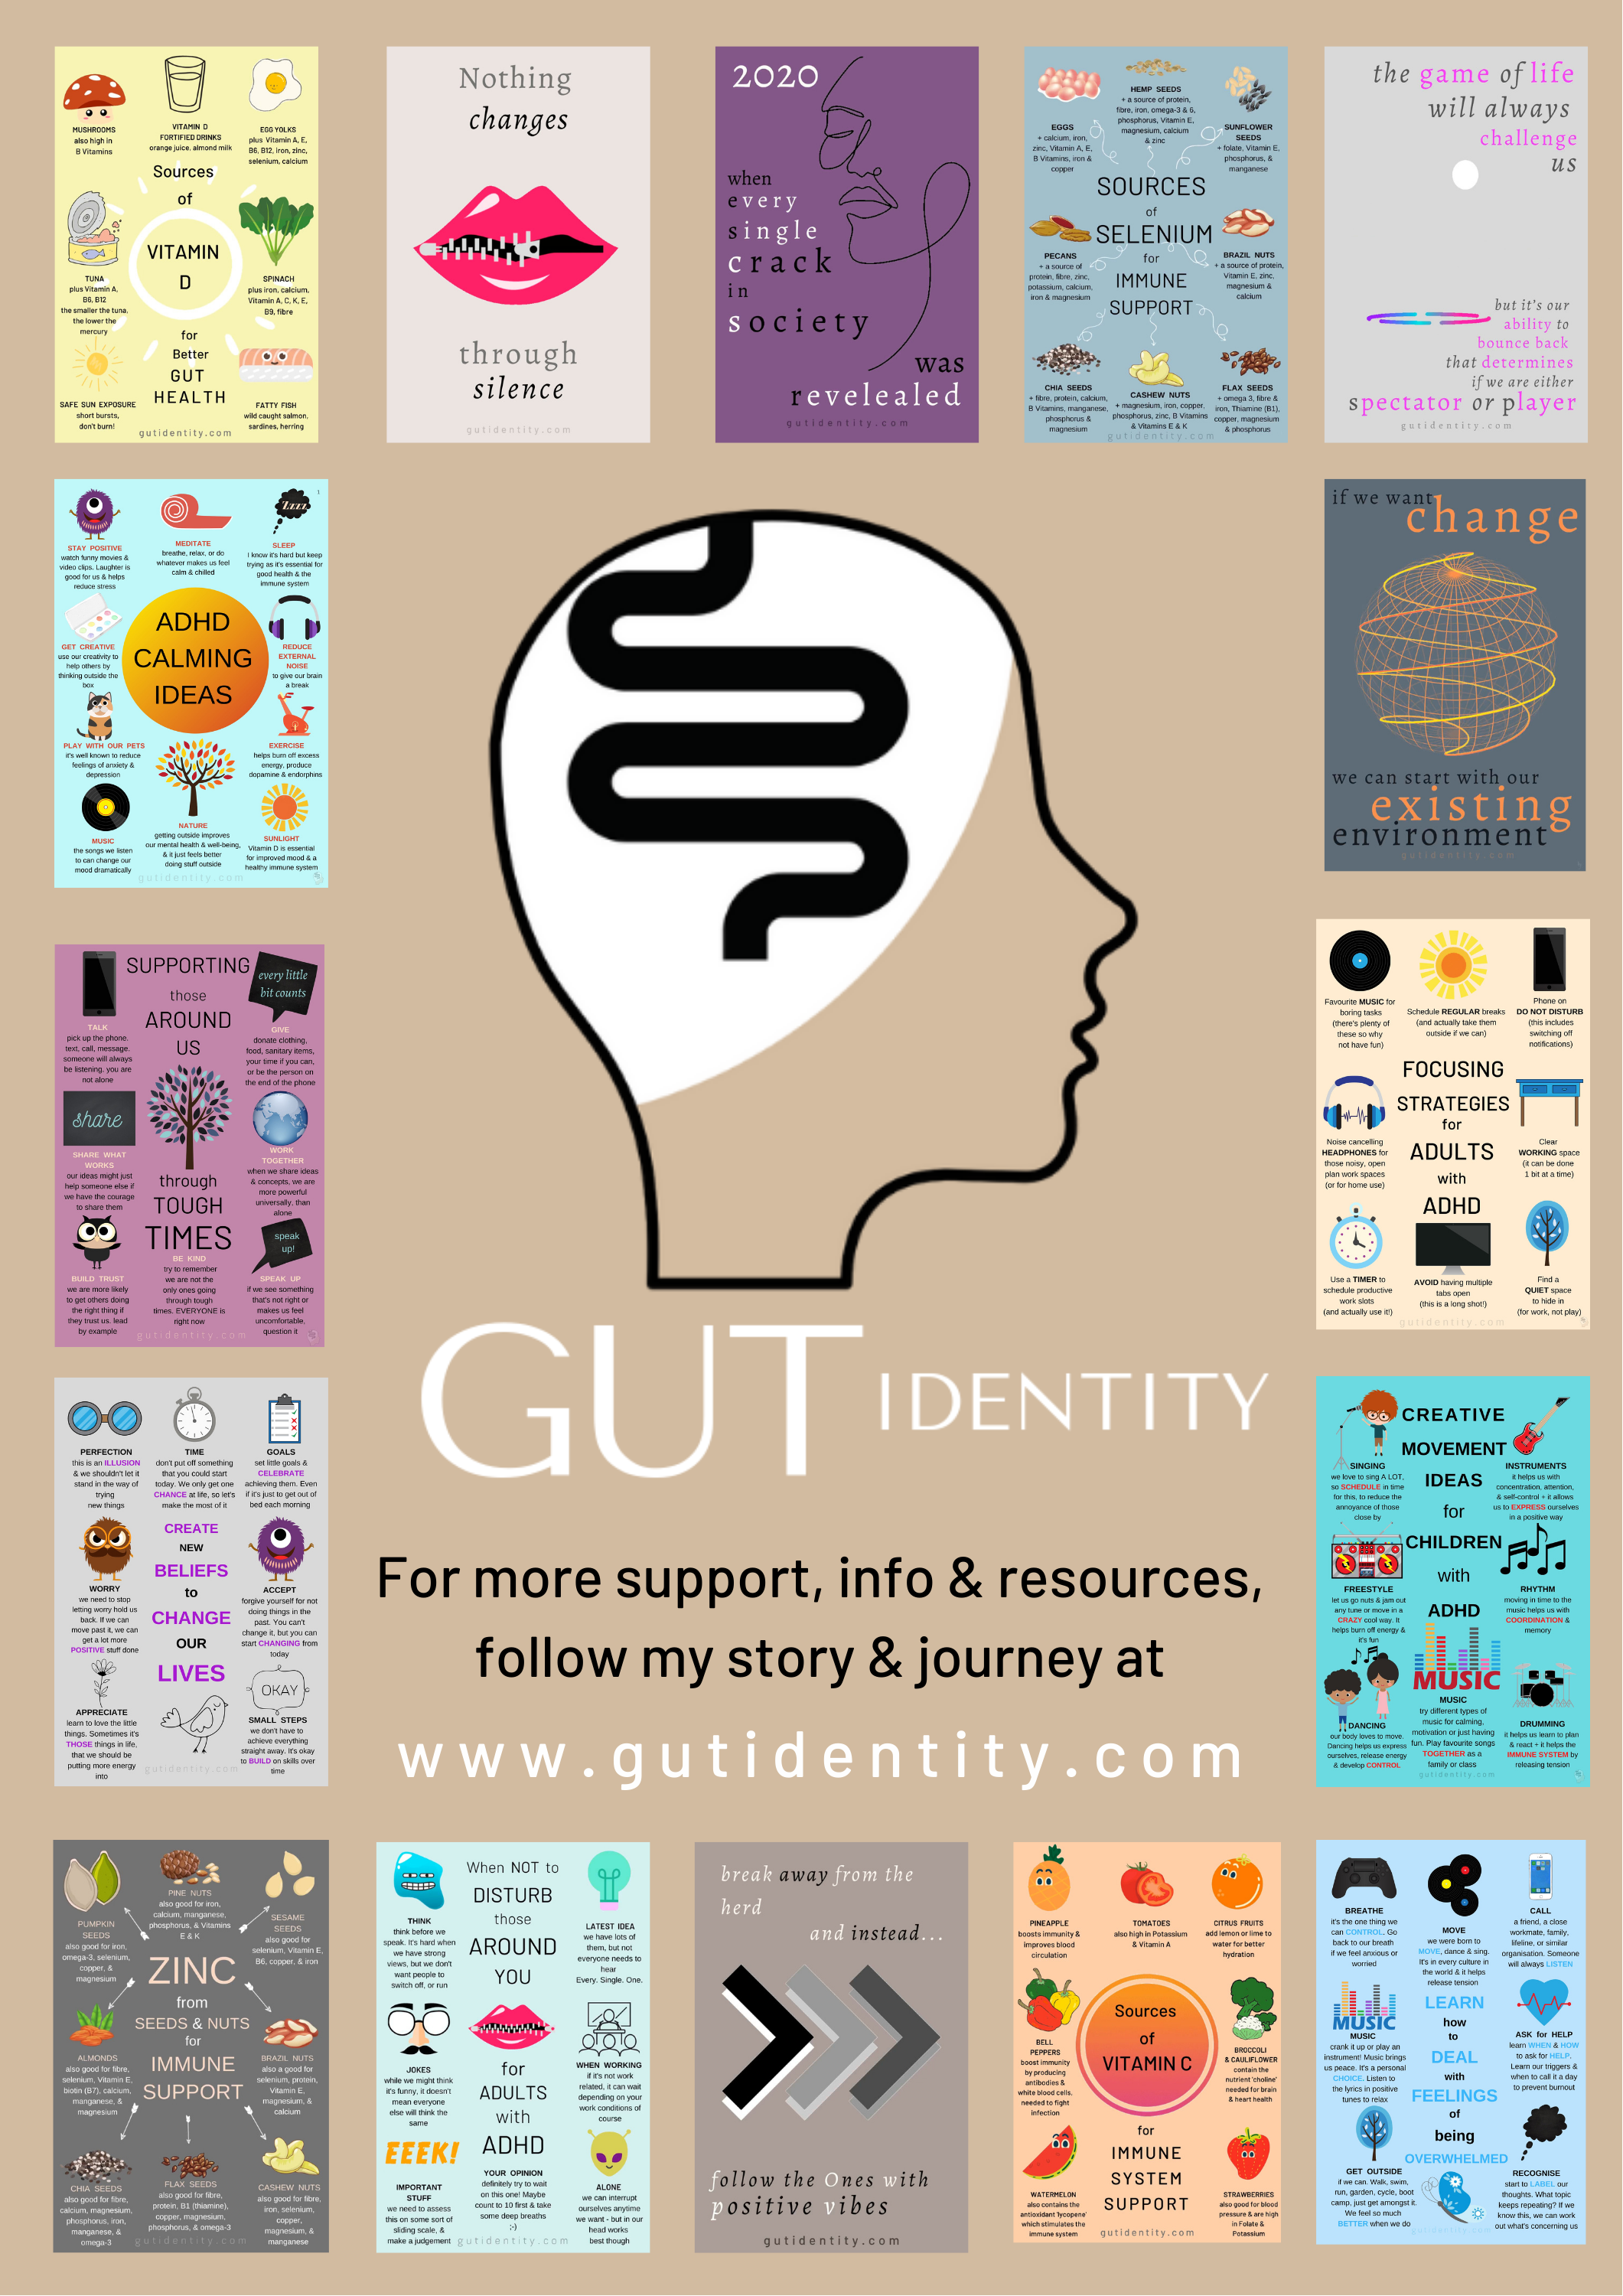 Gutidentity Resources on Education, Health and Well-Being